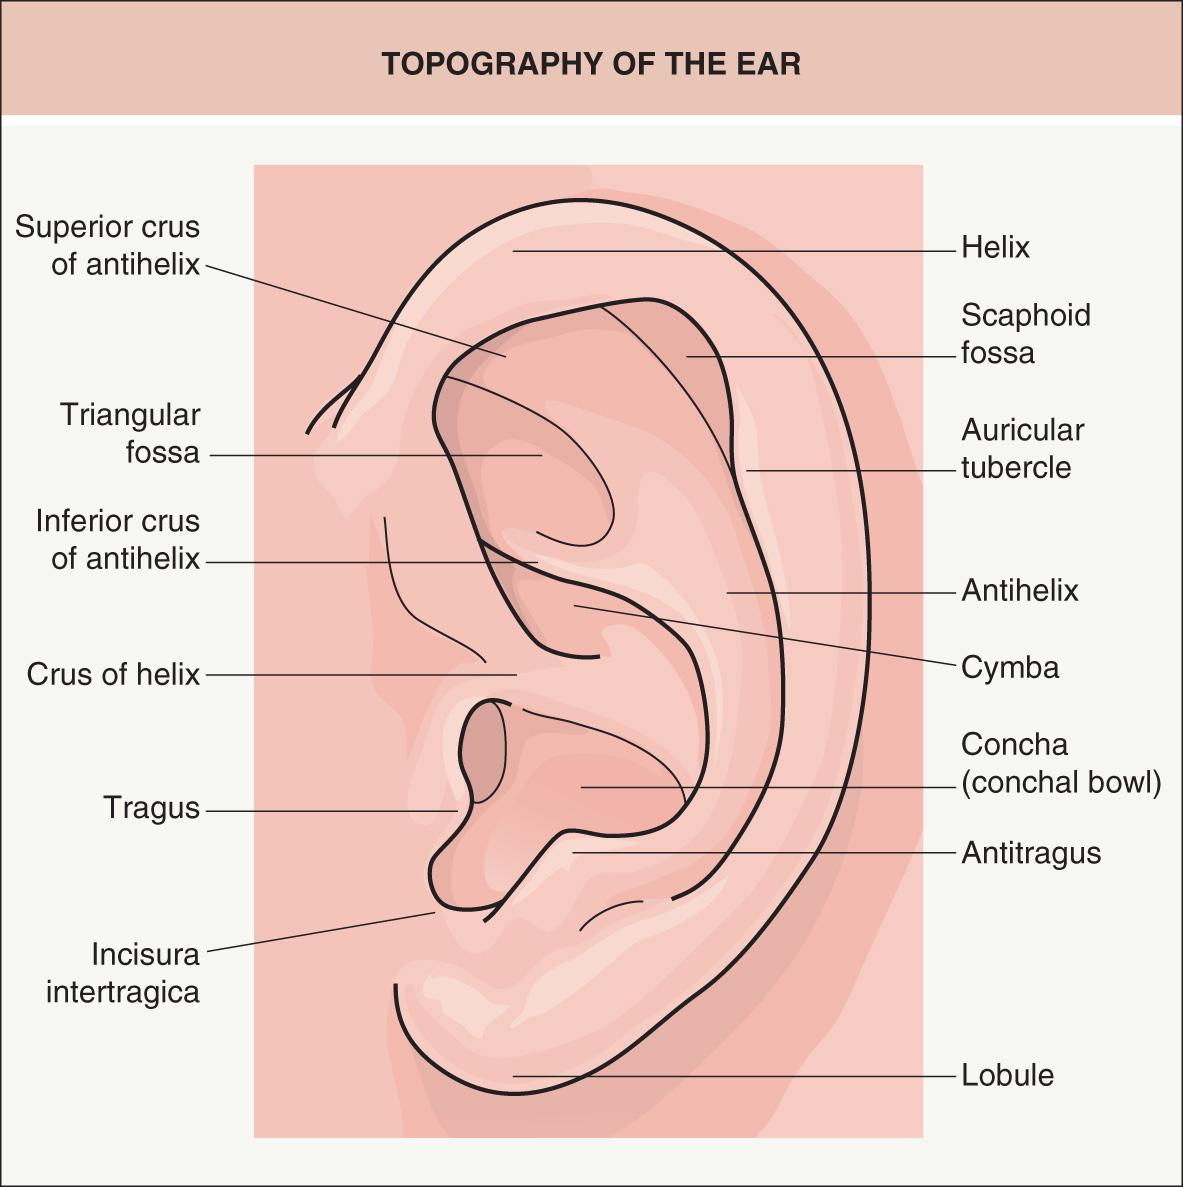 Fig. 142.13, Topography of the ear.